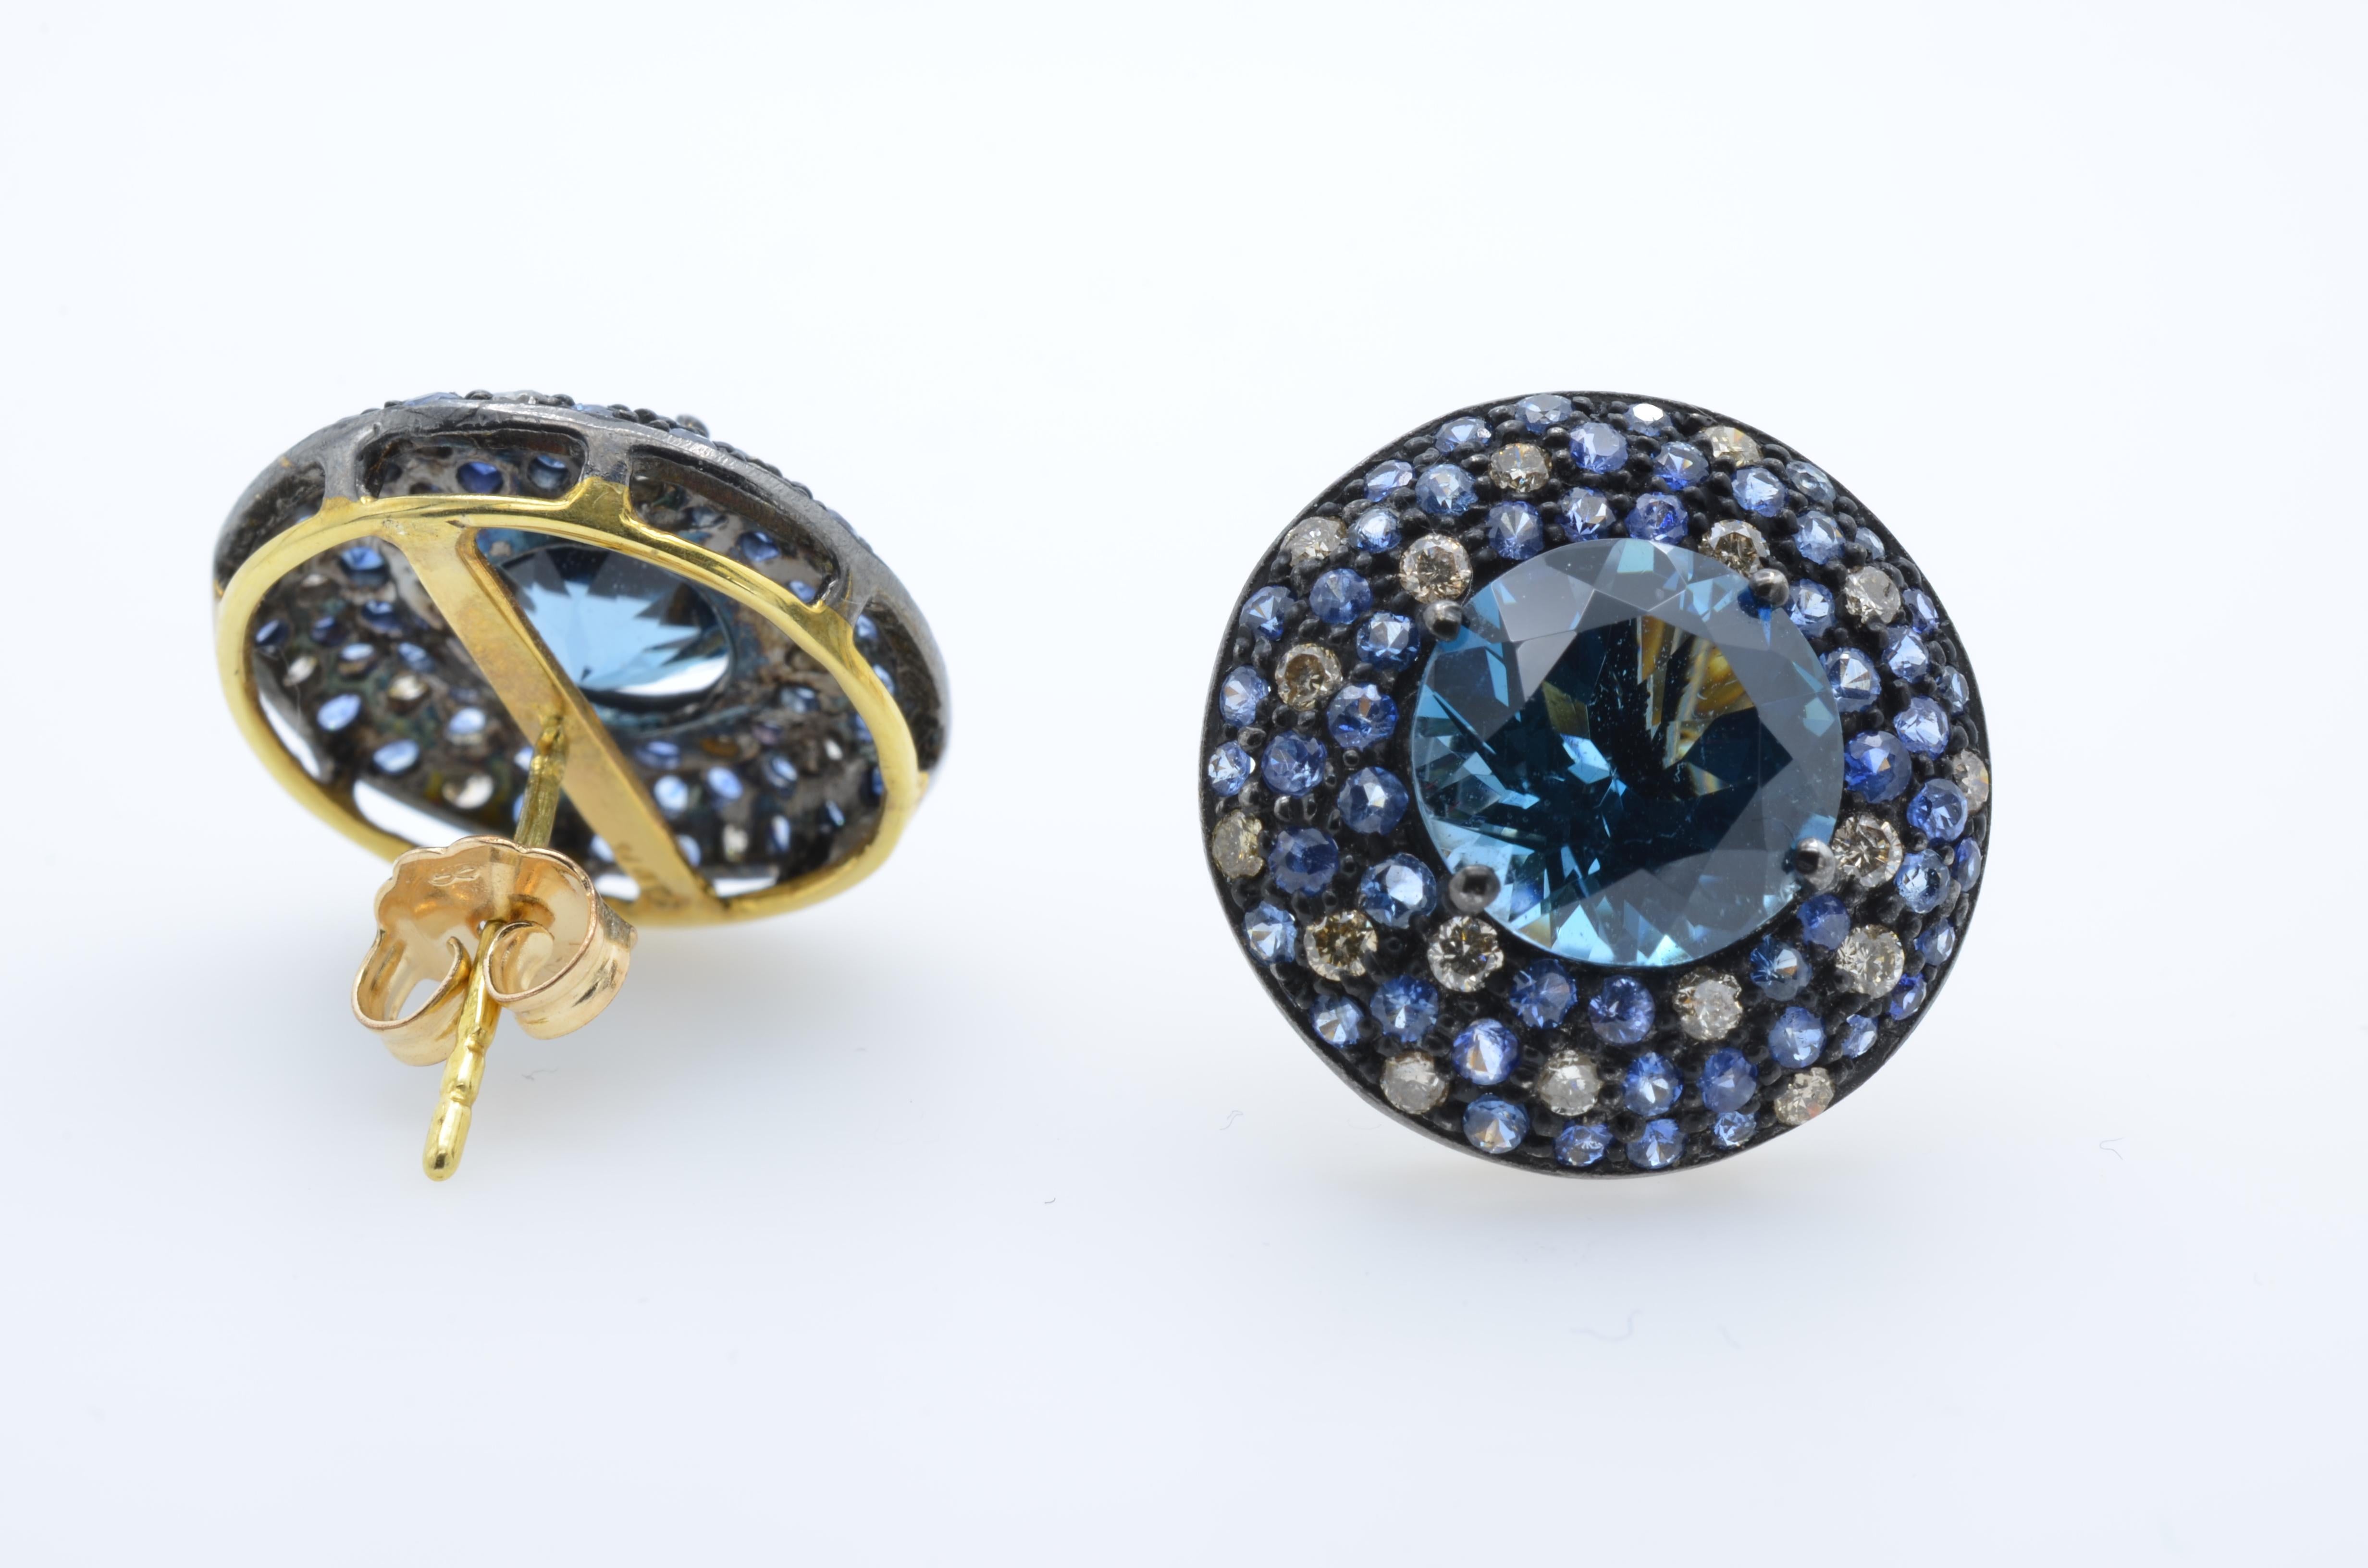 This blue kaleidoscope of jewels surrounds a deep blue topaz. The diamonds and sapphires accent the topaz in a random pattern set in oxidized sterling silver and backed in 18k gold. They are fun and fanciful and full of dazzle!!